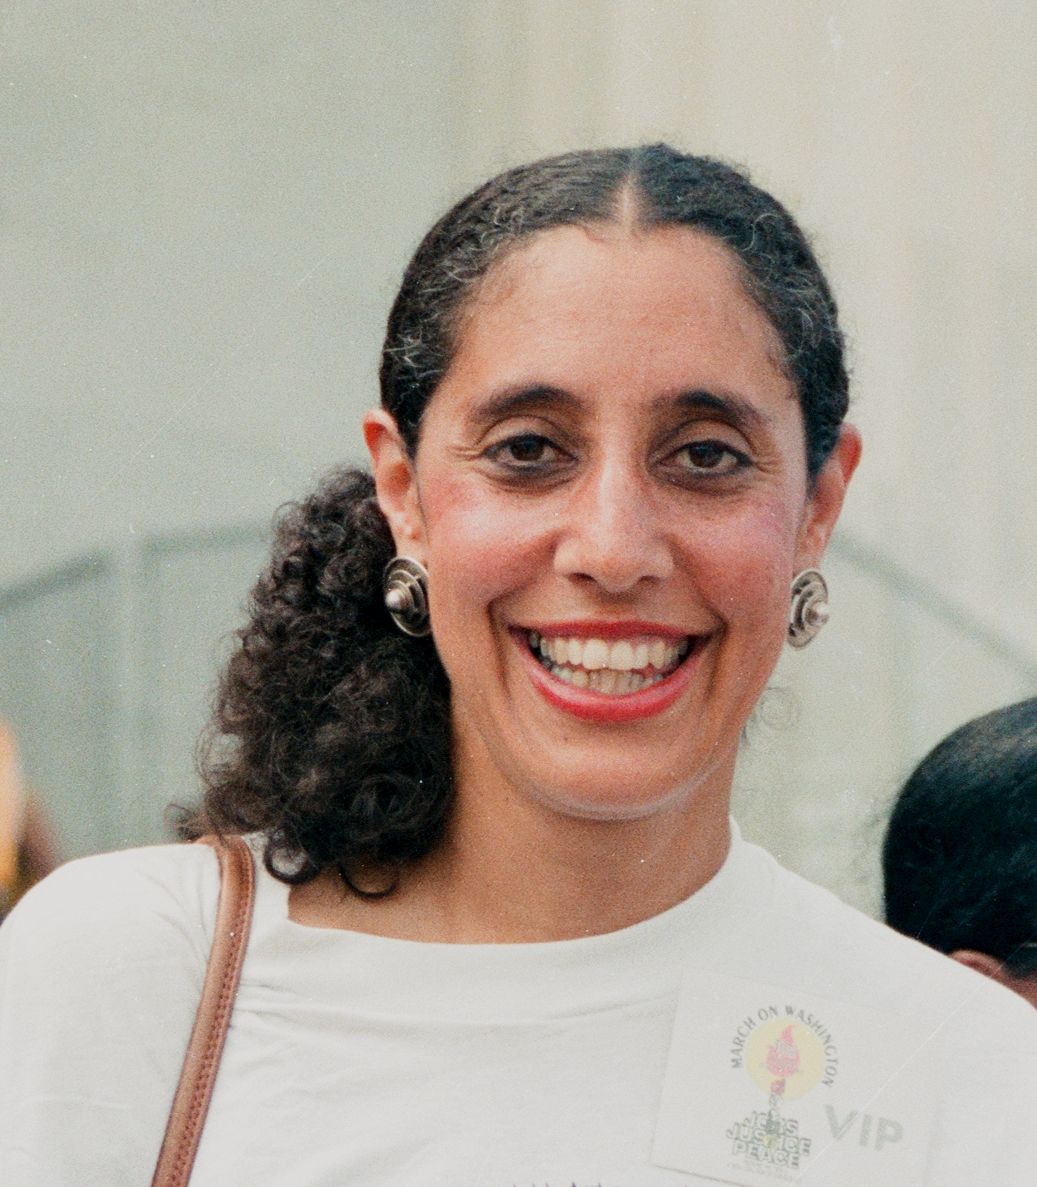 Guinier smiling, wearing a March on Washington card on shoulder